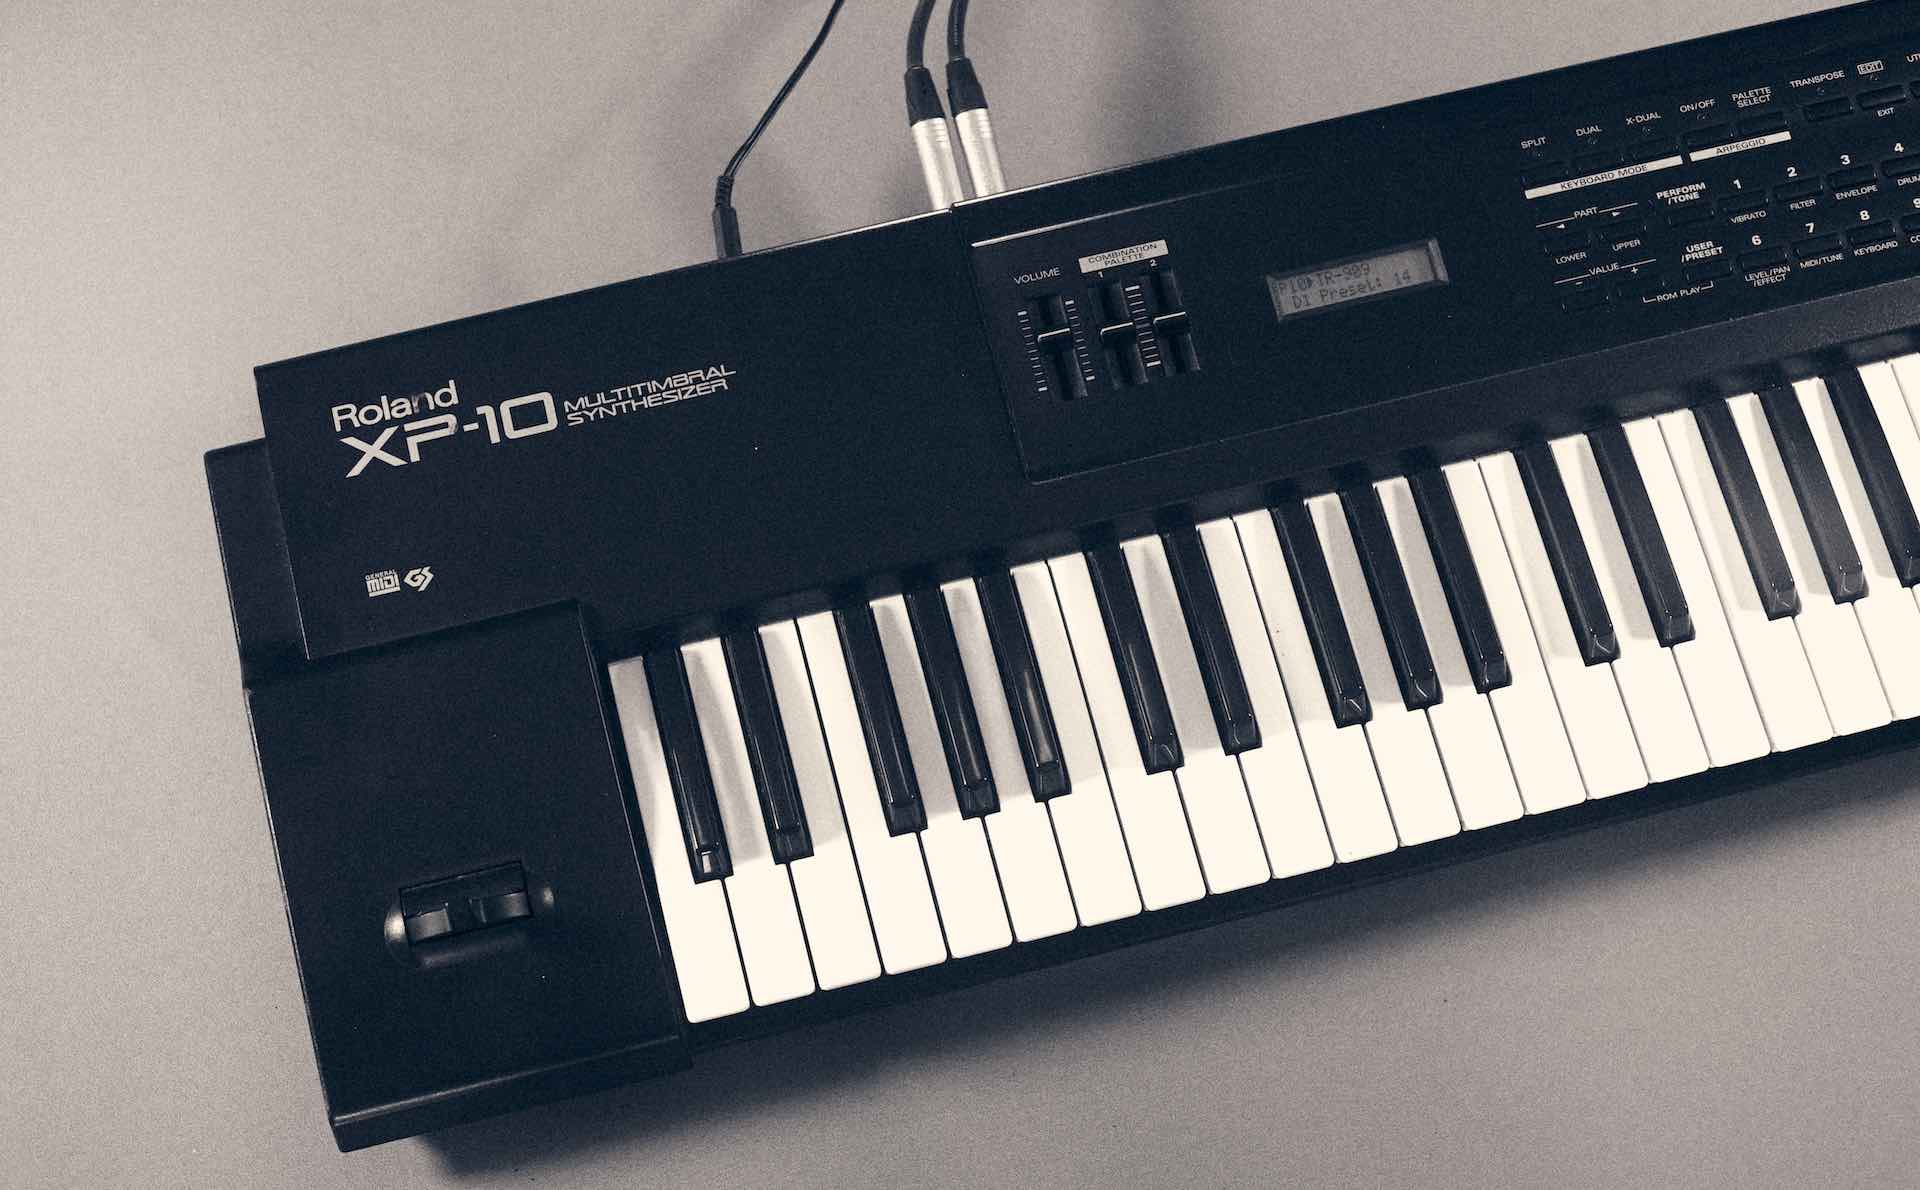 A black and white image of a Roland XP-10 synthesizer